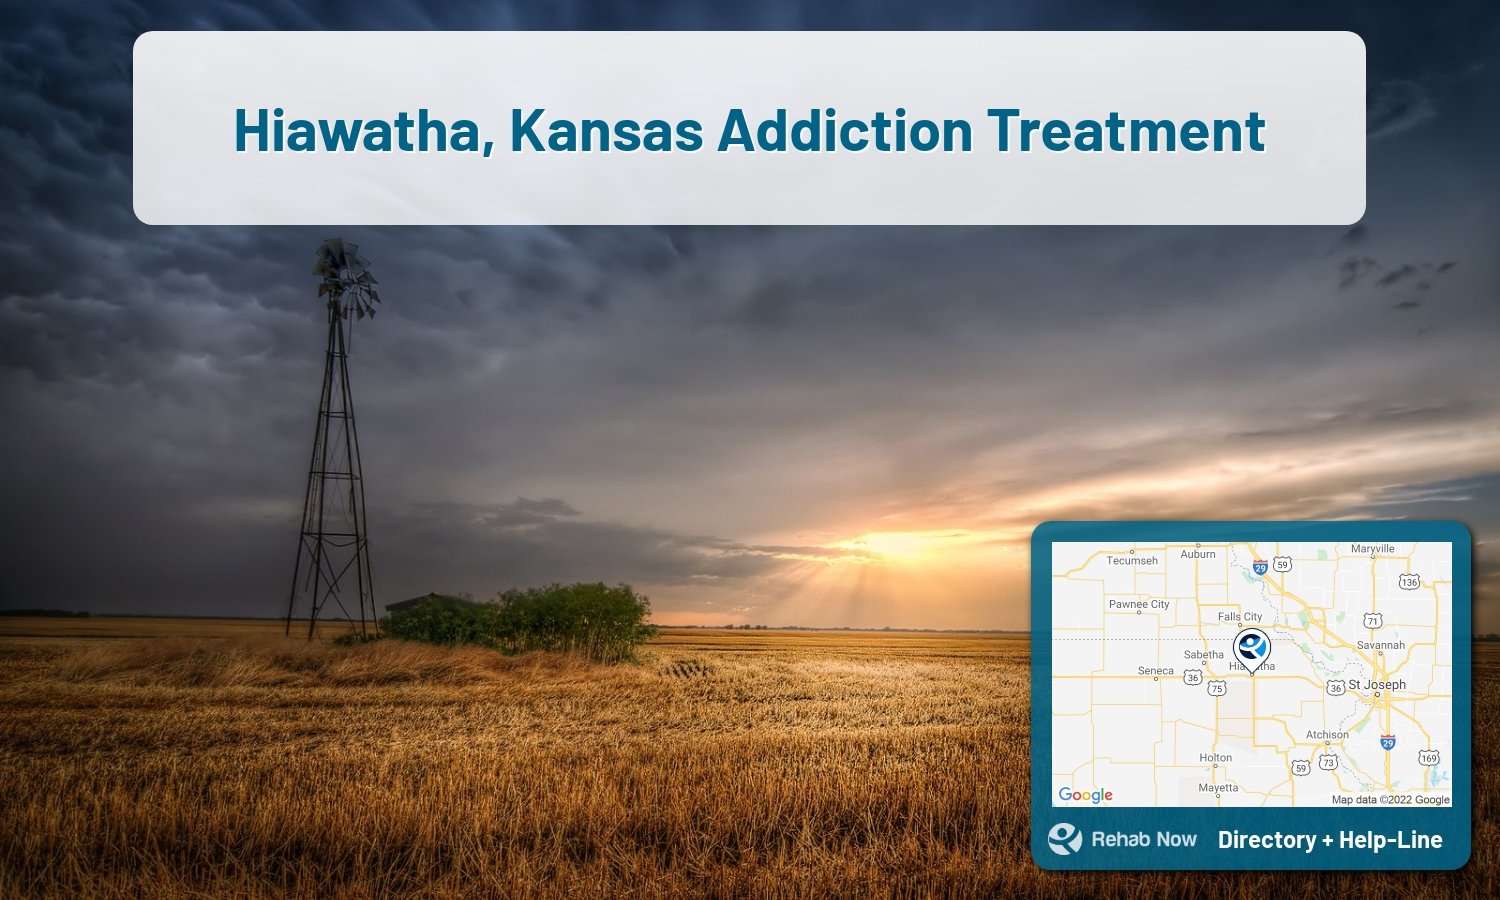 Find drug rehab and alcohol treatment services in Hiawatha. Our experts help you find a center in Hiawatha, Kansas